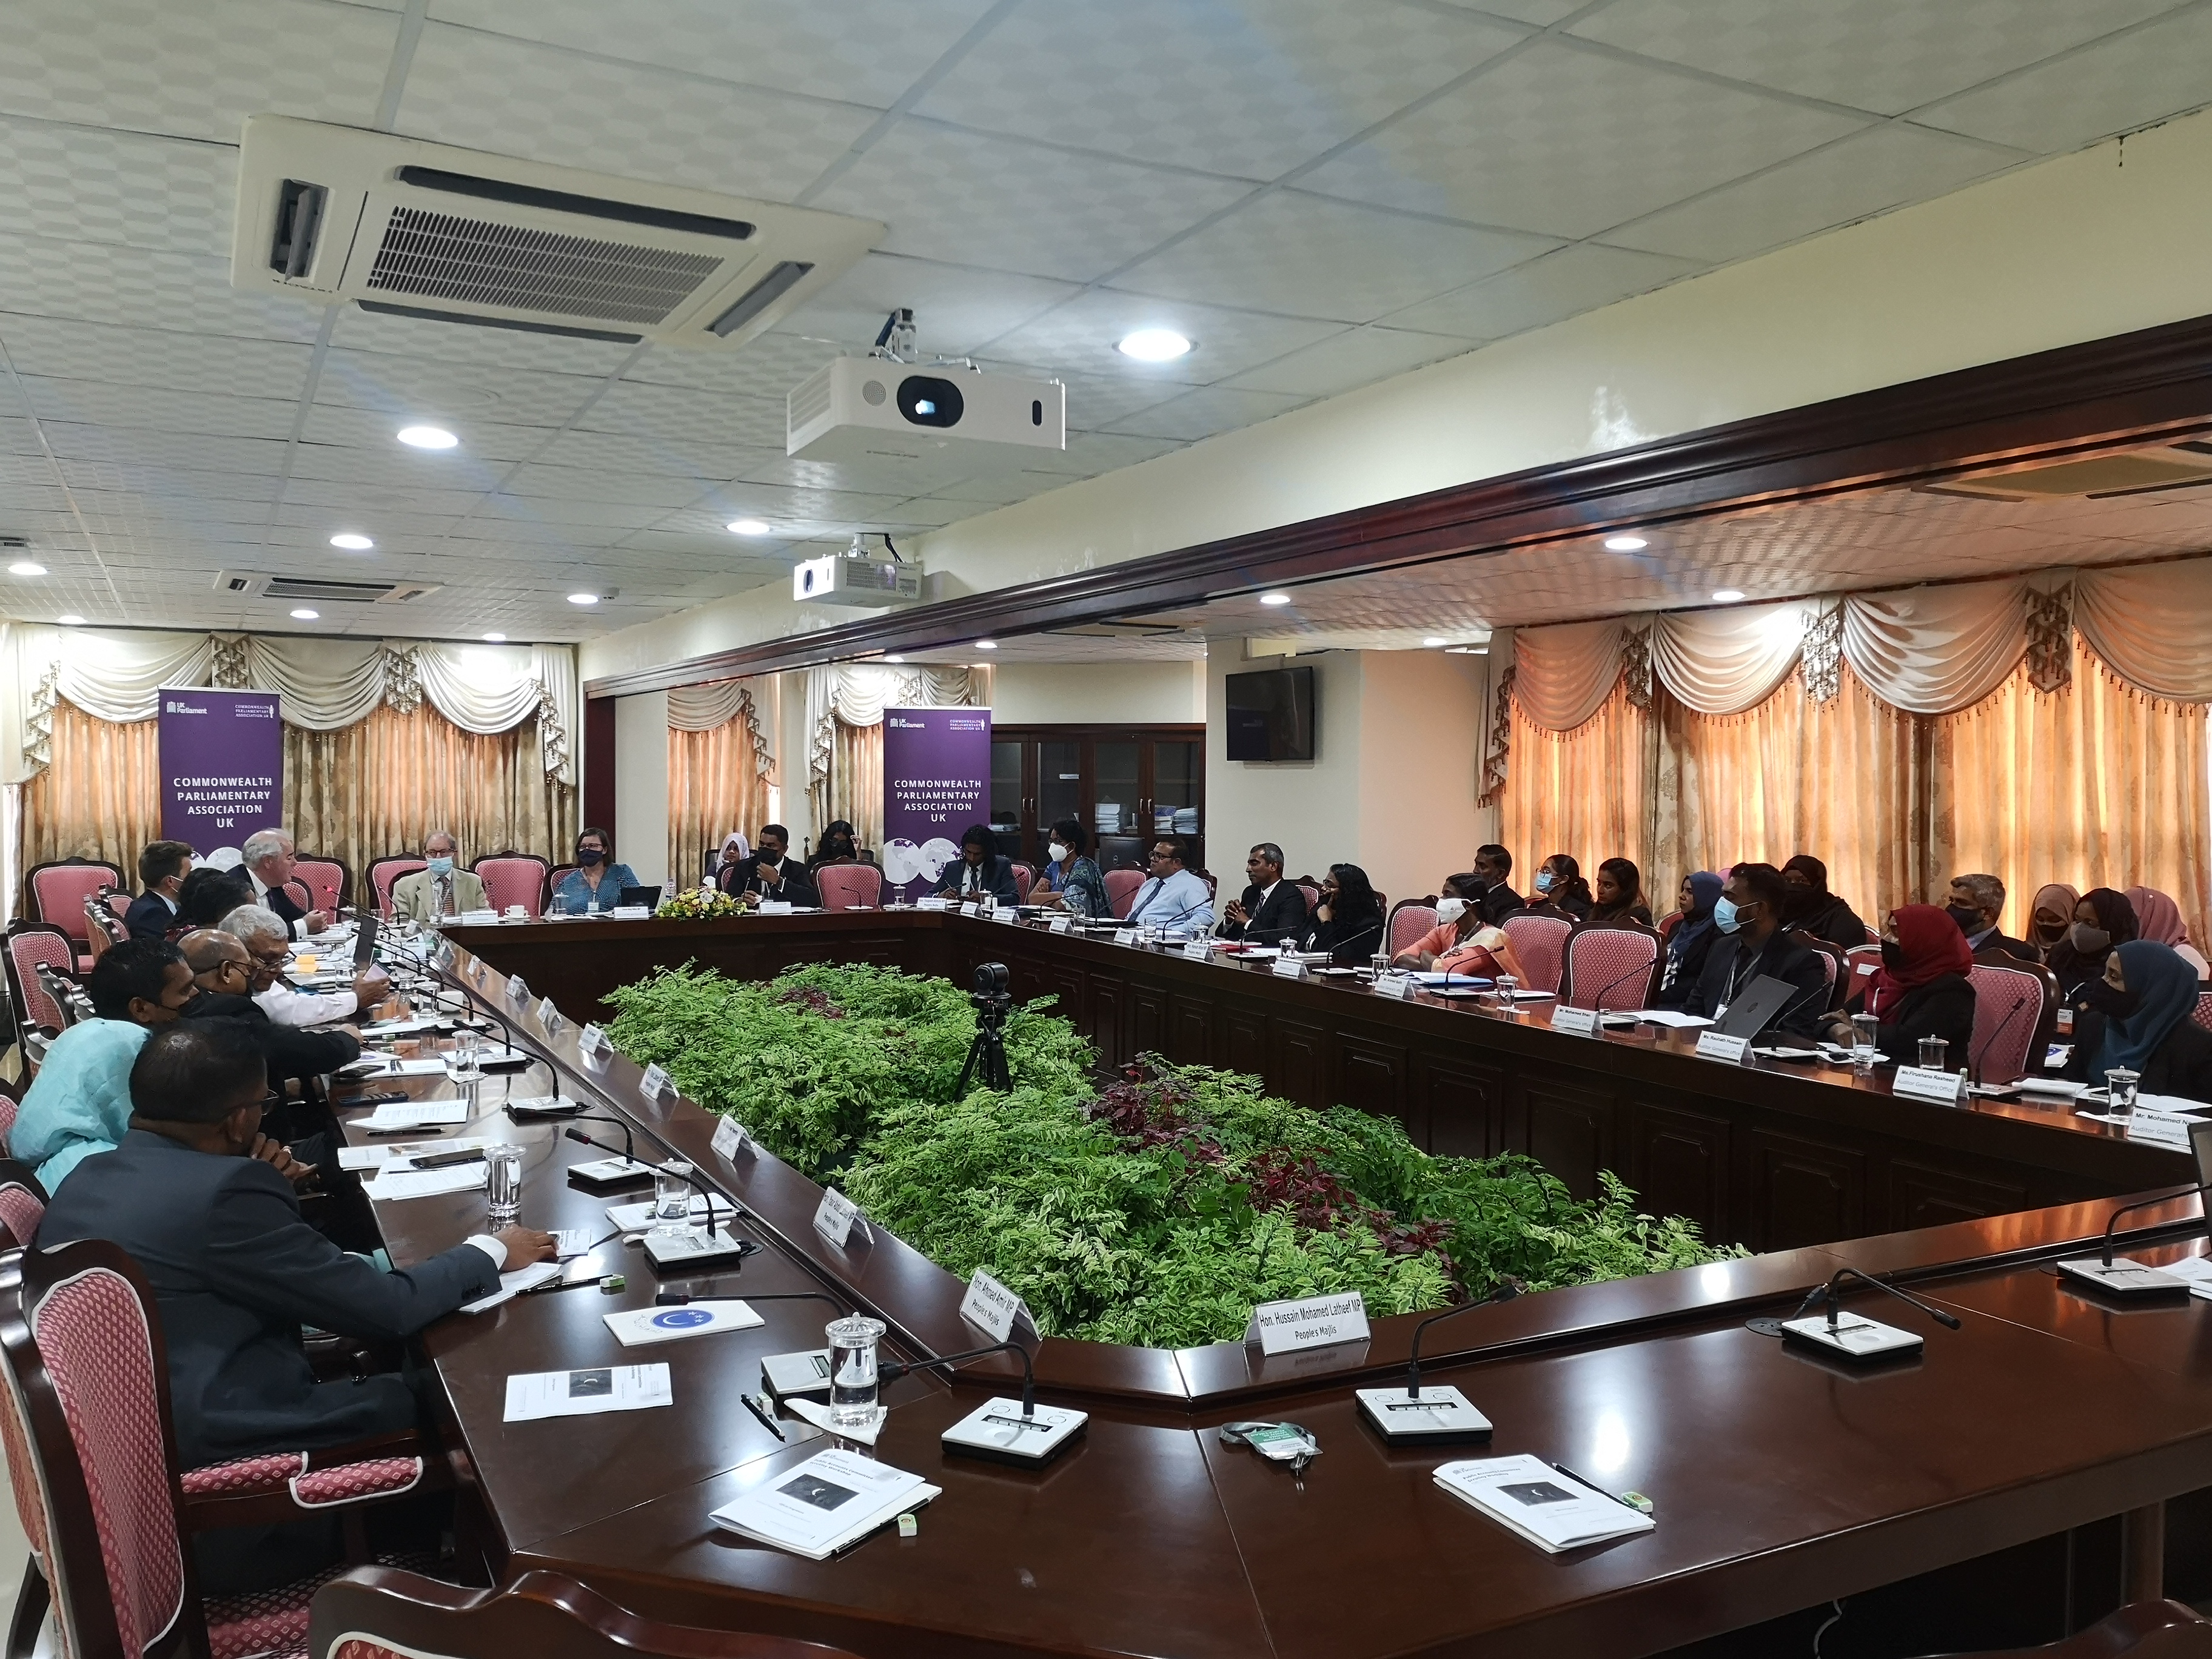 The PAC Scrutiny workshop was attended by 12 parliamentarians, 7 clerks and countless observers from the Auditor General’s Office and the Anti-Corruption Commission.